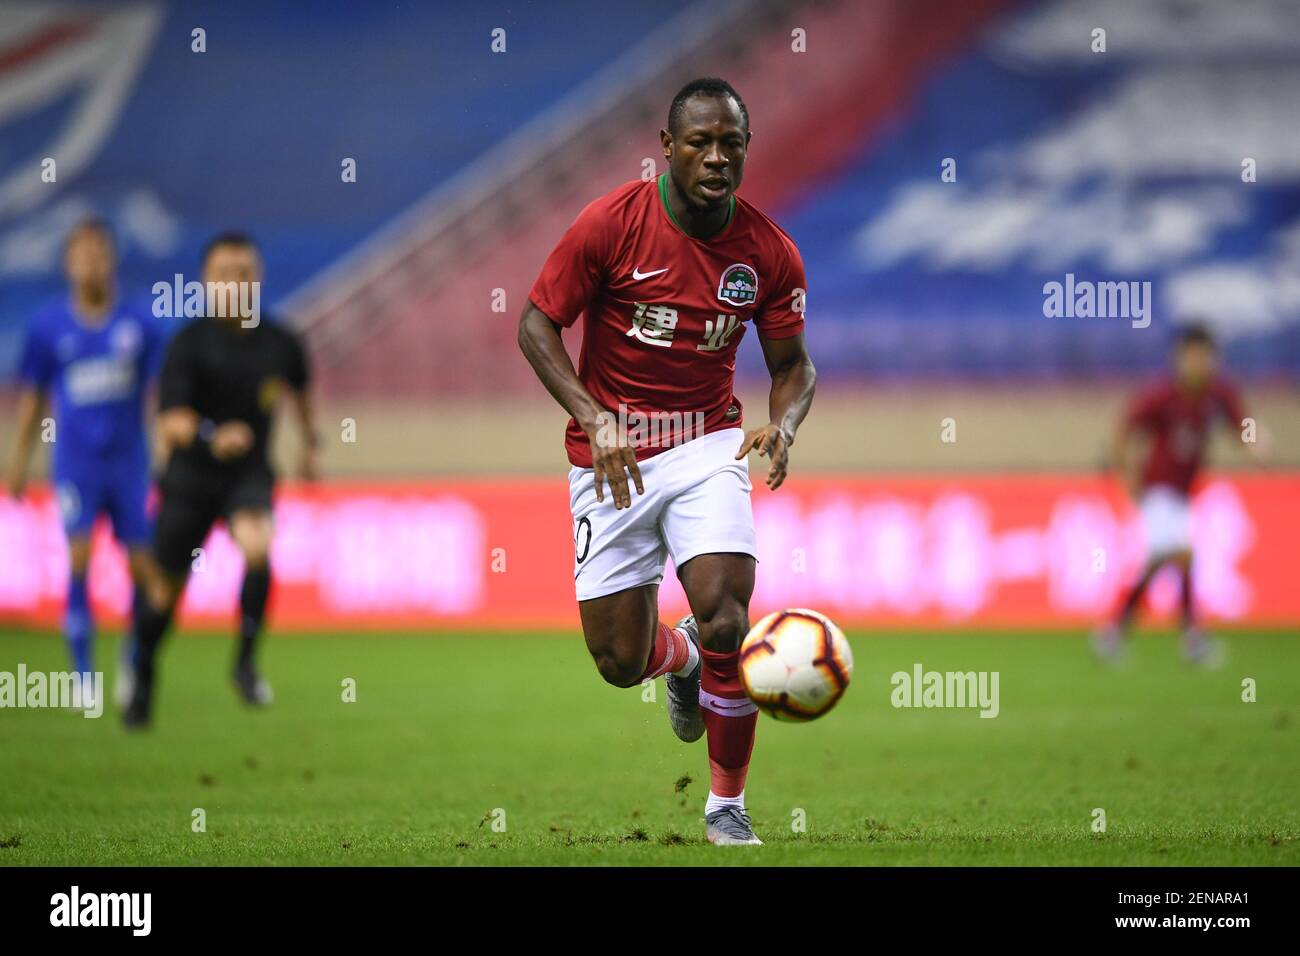 Cameroonian football player Christian Bassogog of Henan Jianye F.C. keeps the ball during the 18th round of Chinese Football Association Super League (CSL) against Shanghai Greenland Shenhua in Shanghai, China, 16 July 2019. (Photo by Stringer - Imaginechina/Sipa USA) Stock Photo